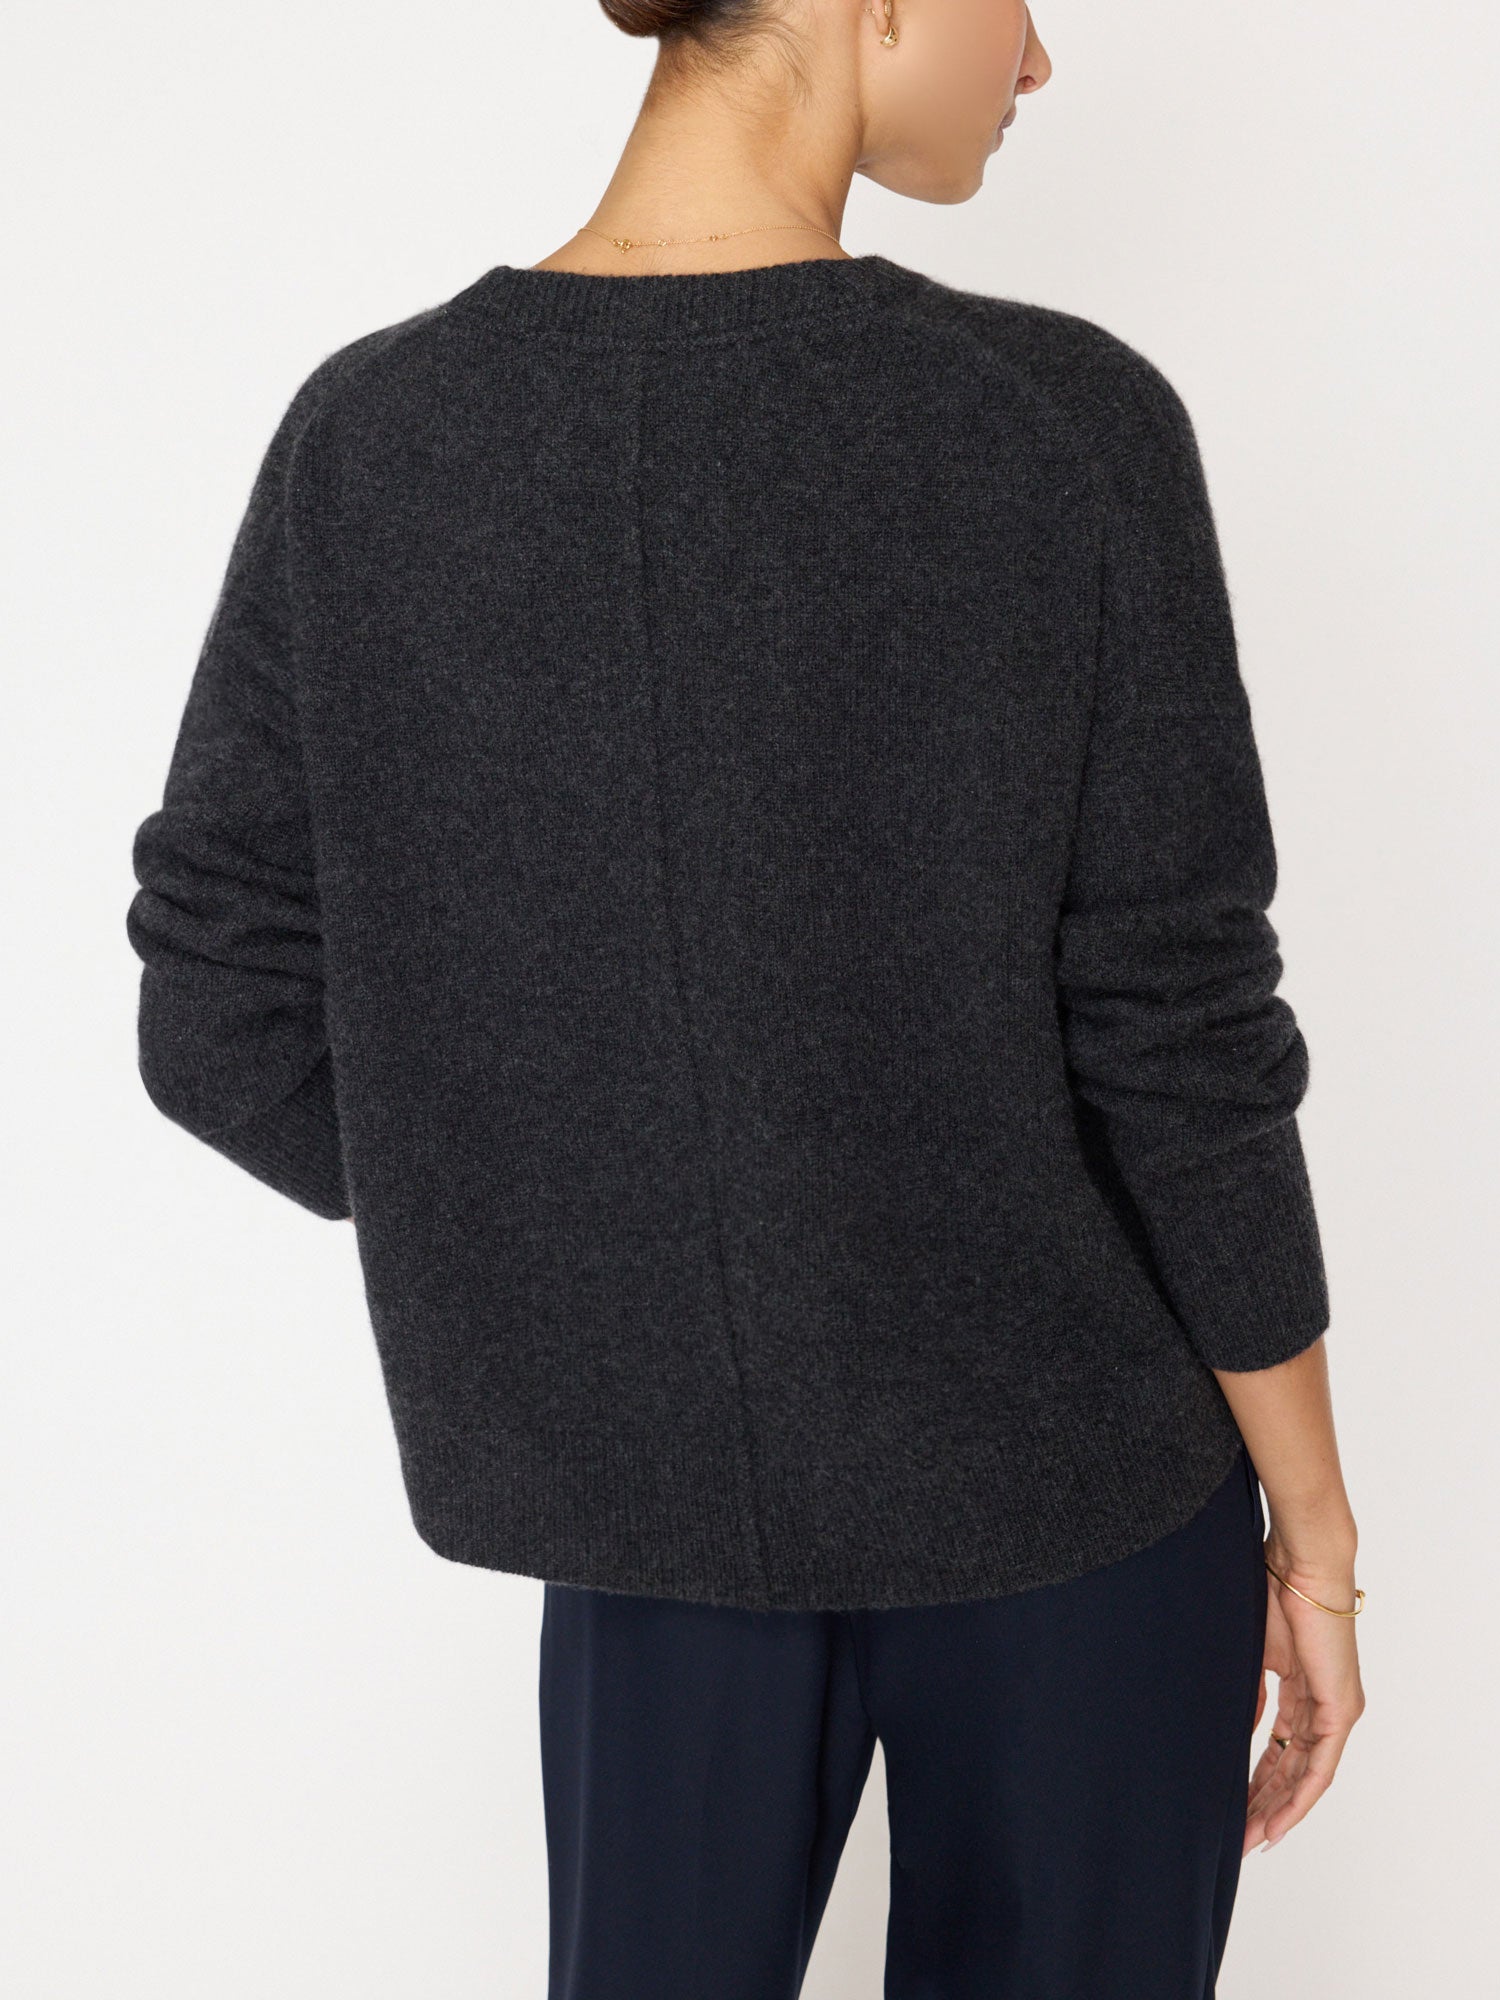 Everyday cashmere crewneck grey sweater back view